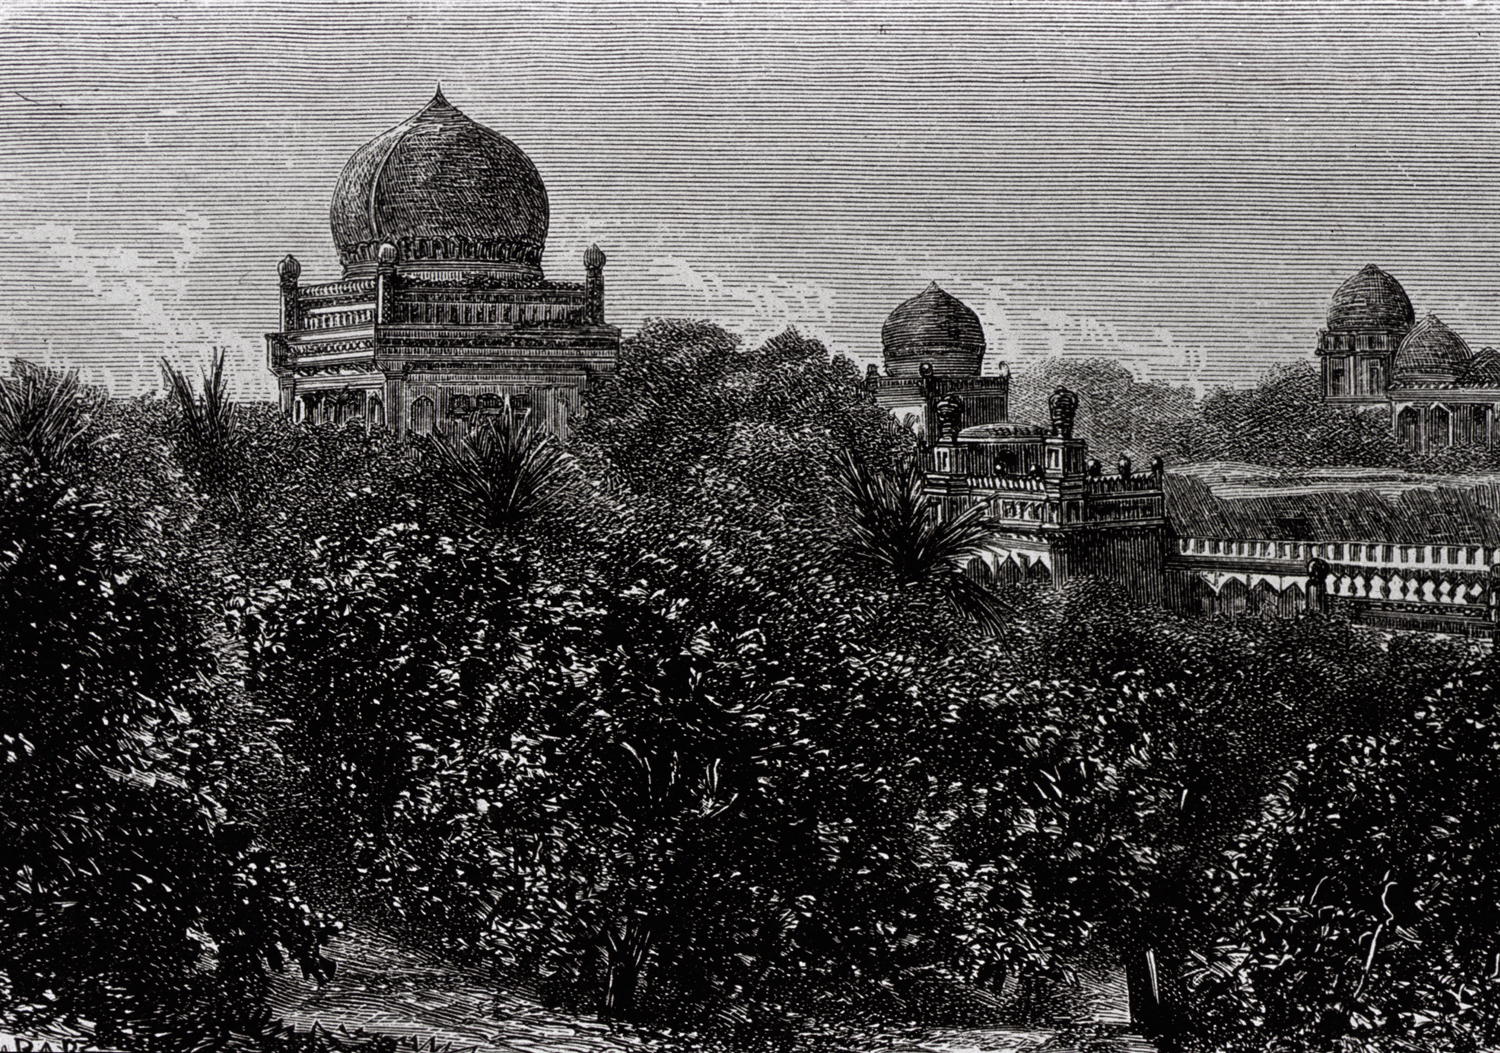 Nineteenth century drawing depicting a partial view of Golconda tombs set in a dense garden